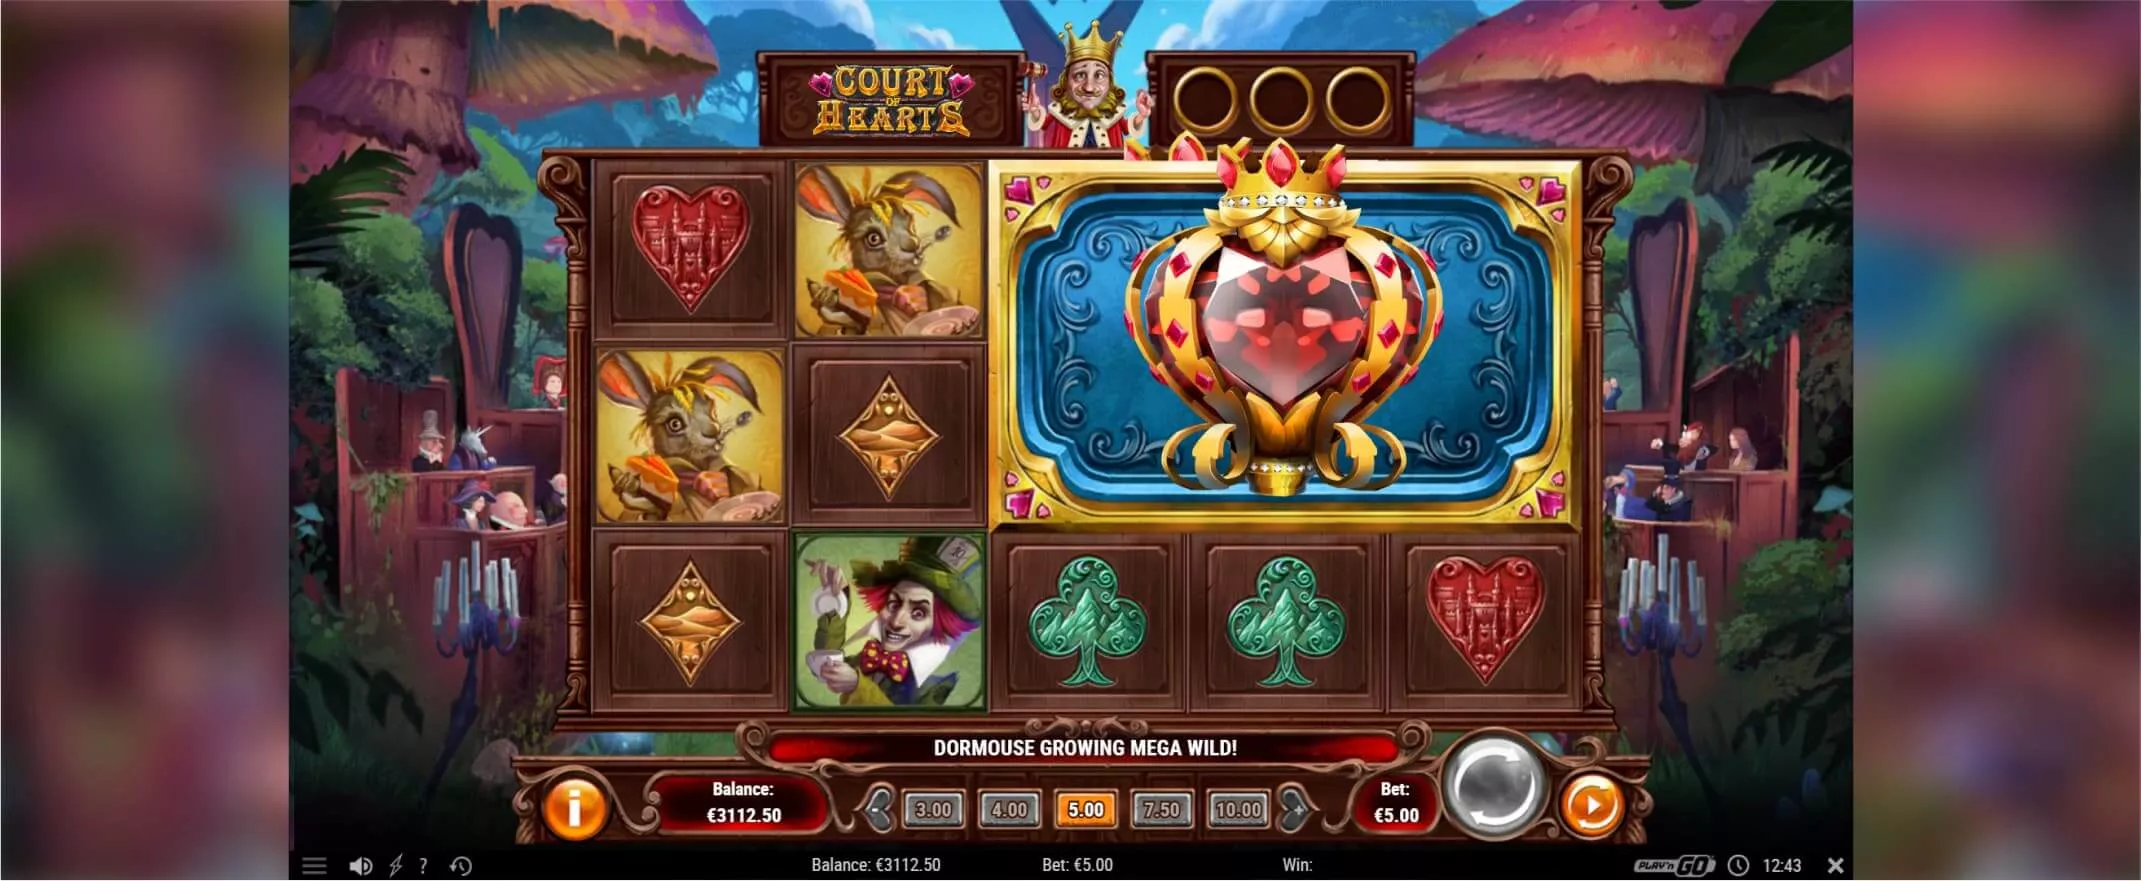 Court of Hearts slot screenshot of the reels